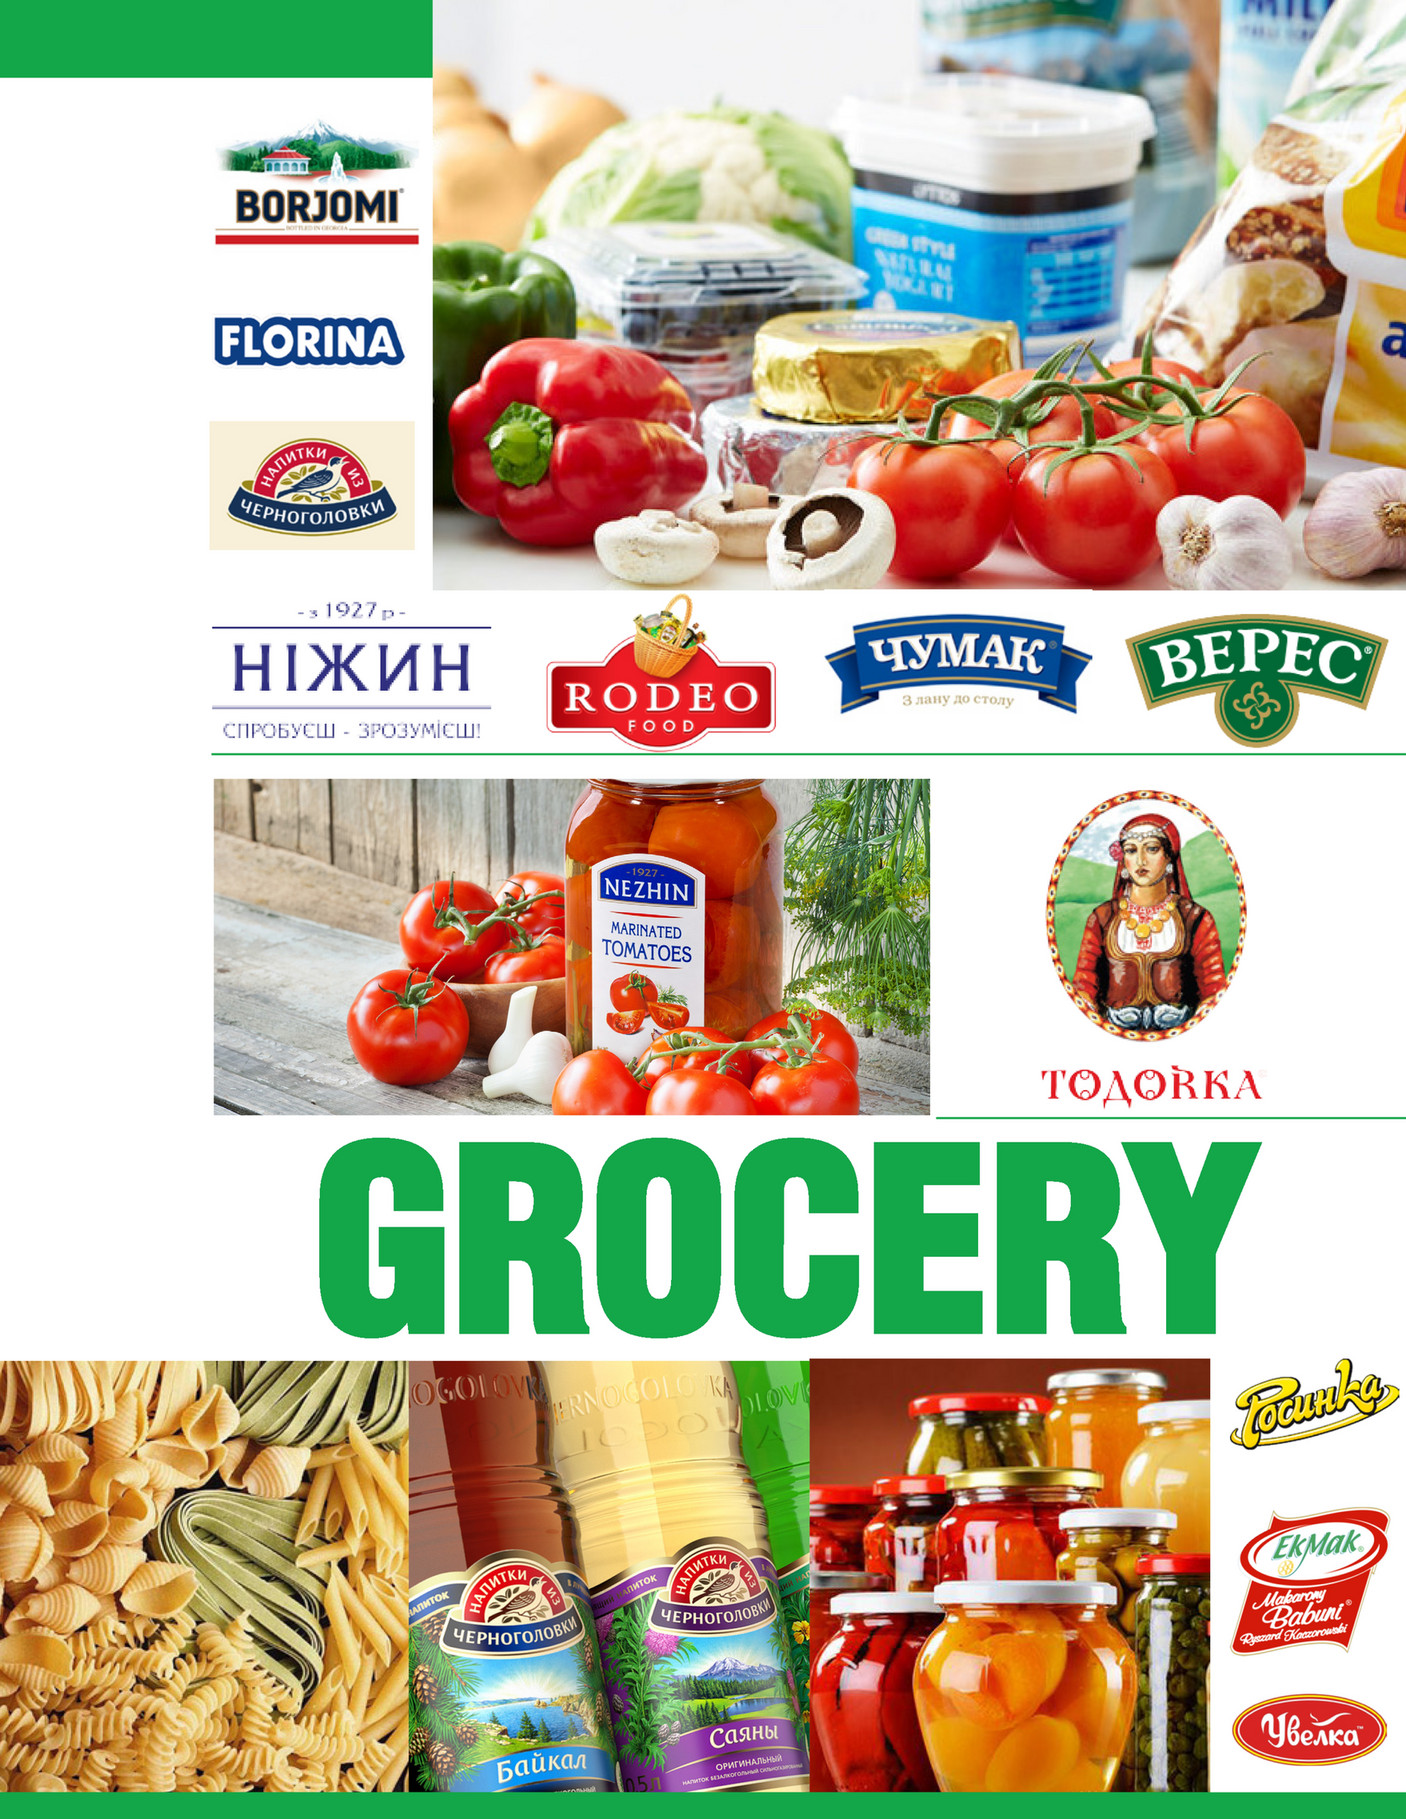 Rodeo Food Distribution Inc RODEO FOOD CATALOG (GROCERY) Page 1